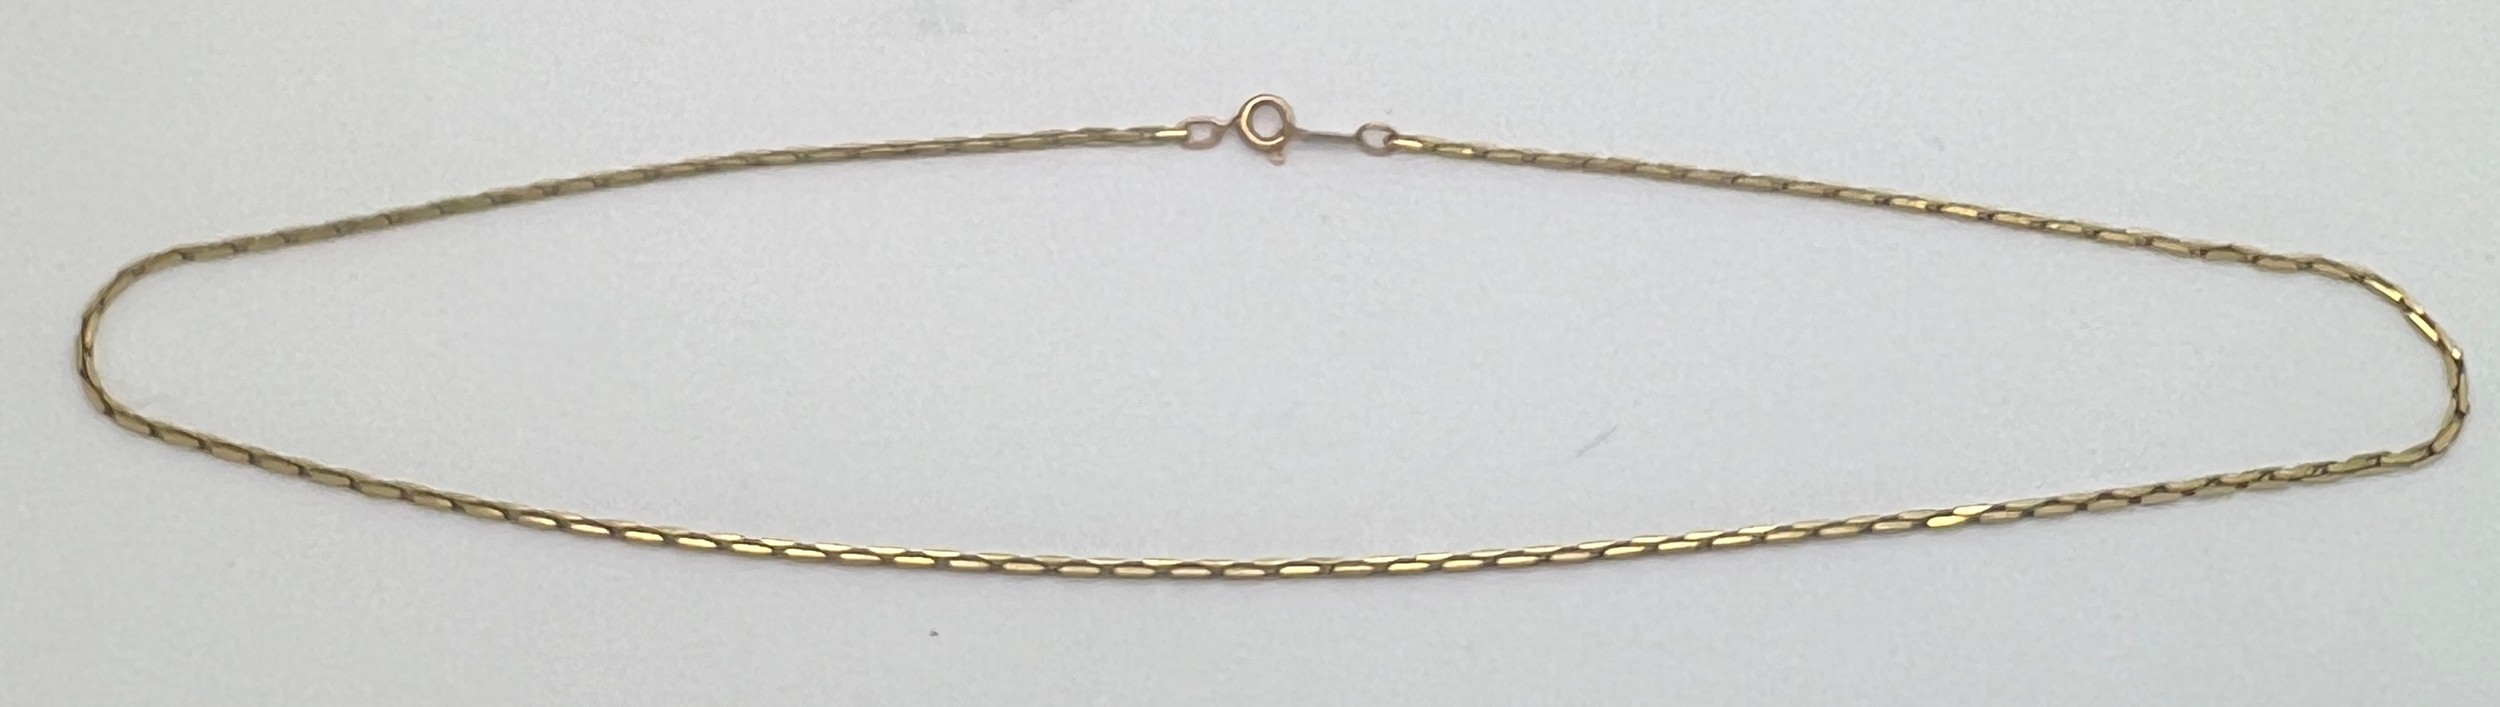 A 9 carat yellow gold chain necklace weight 7.6gm, length 48cm.